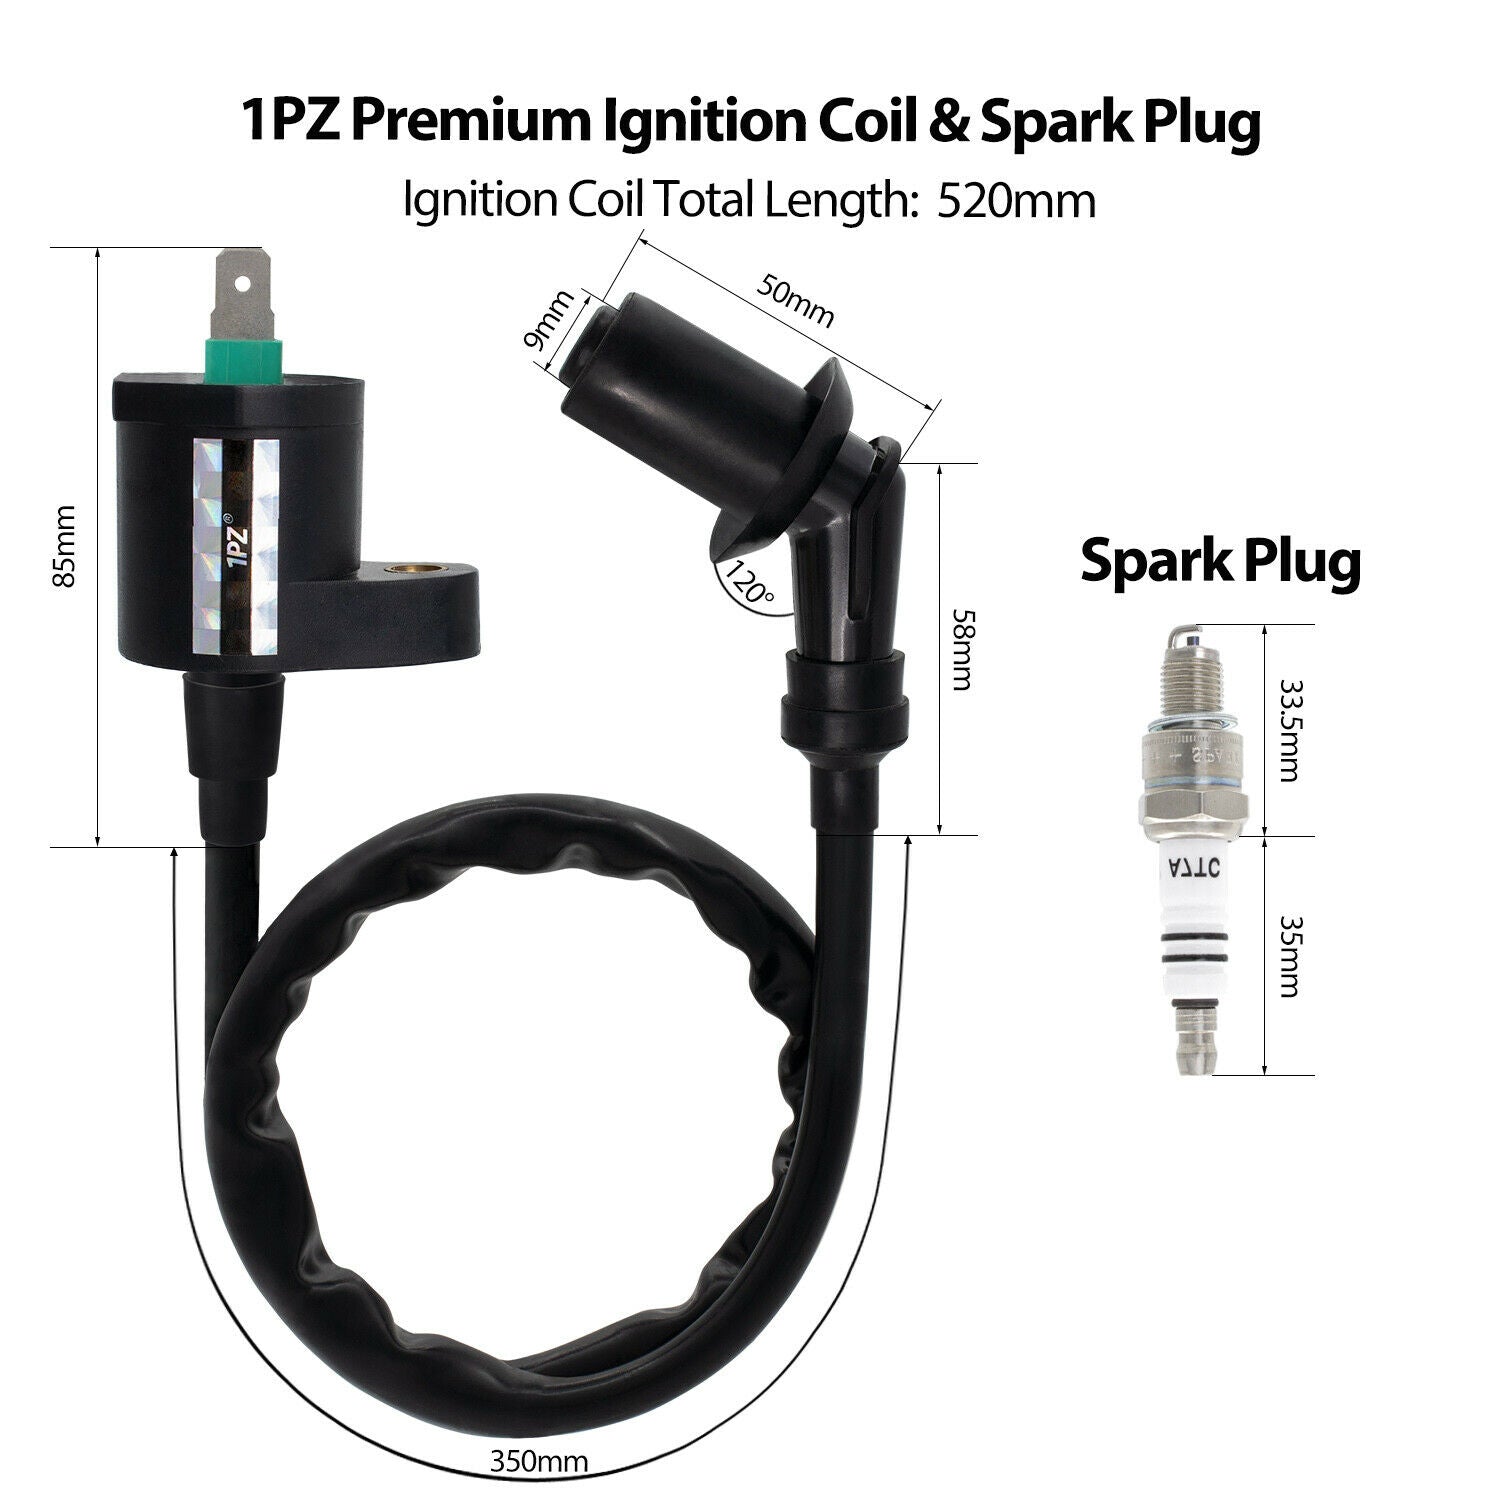 1PZ Ignition Coil Spark Plug Replacement for Honda XR50 XR70 XR80 XR100 CRF50 CRF70 CRF80 CRF100